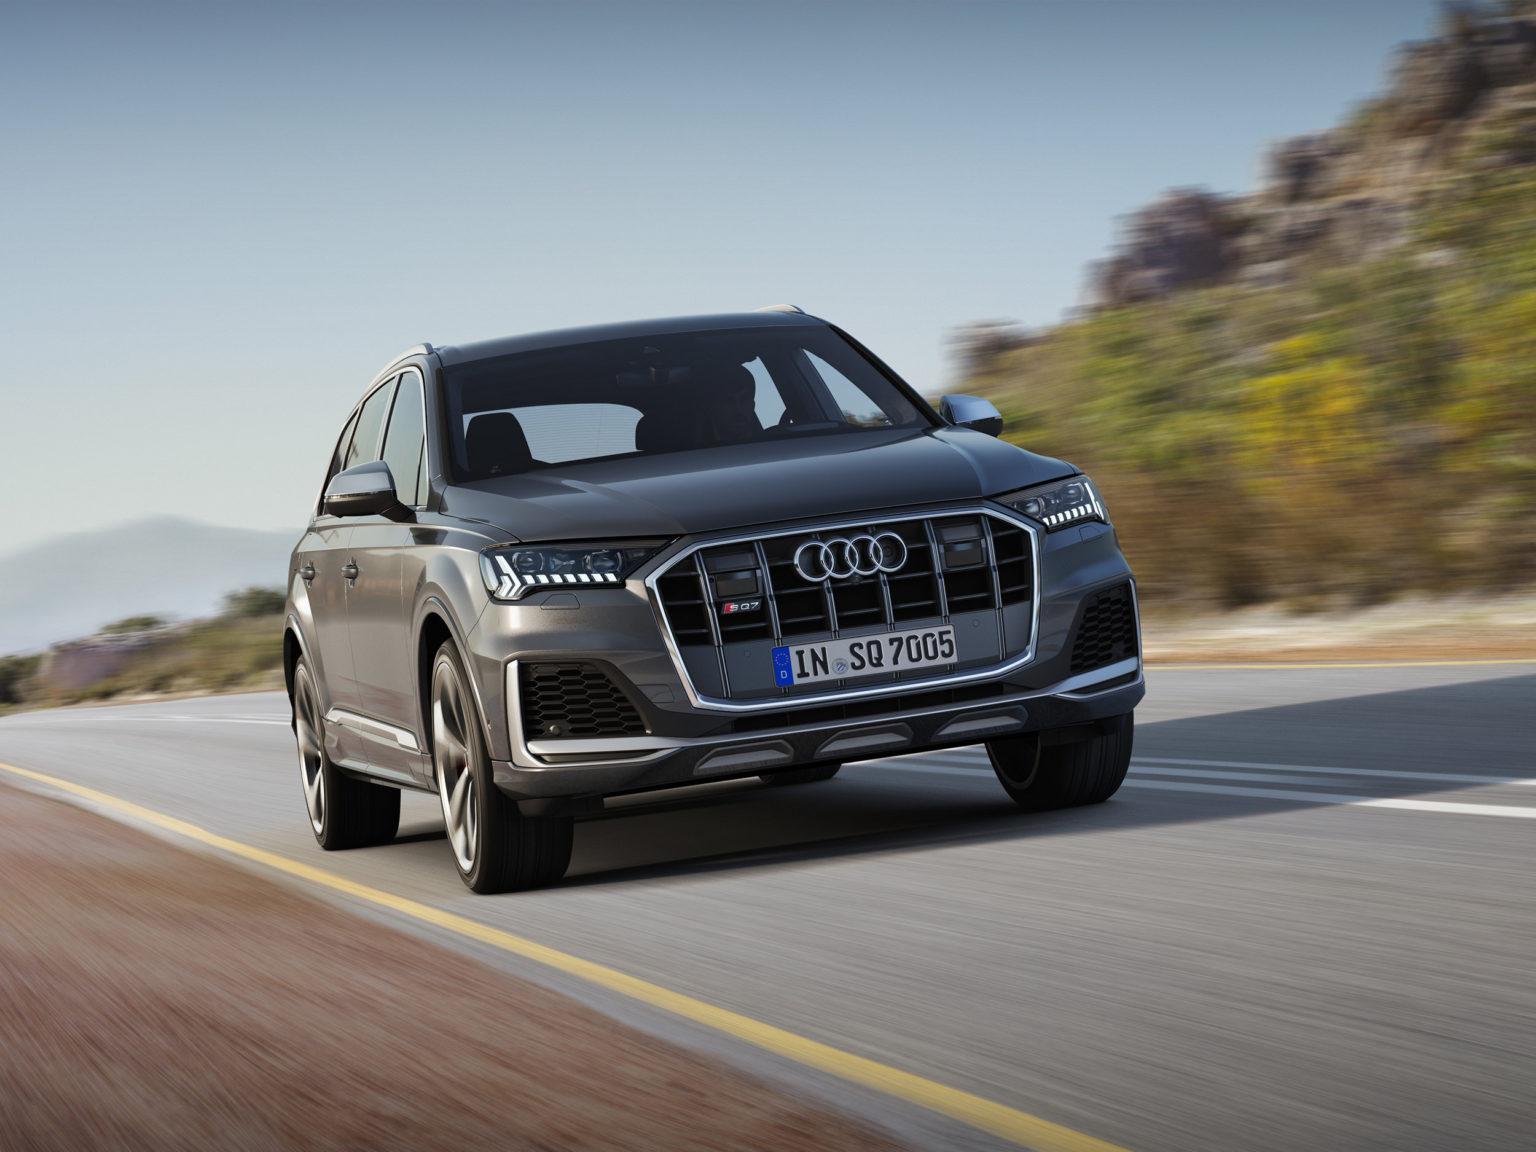 The Audi SQ7 is a sporty take on the three-row SUV.